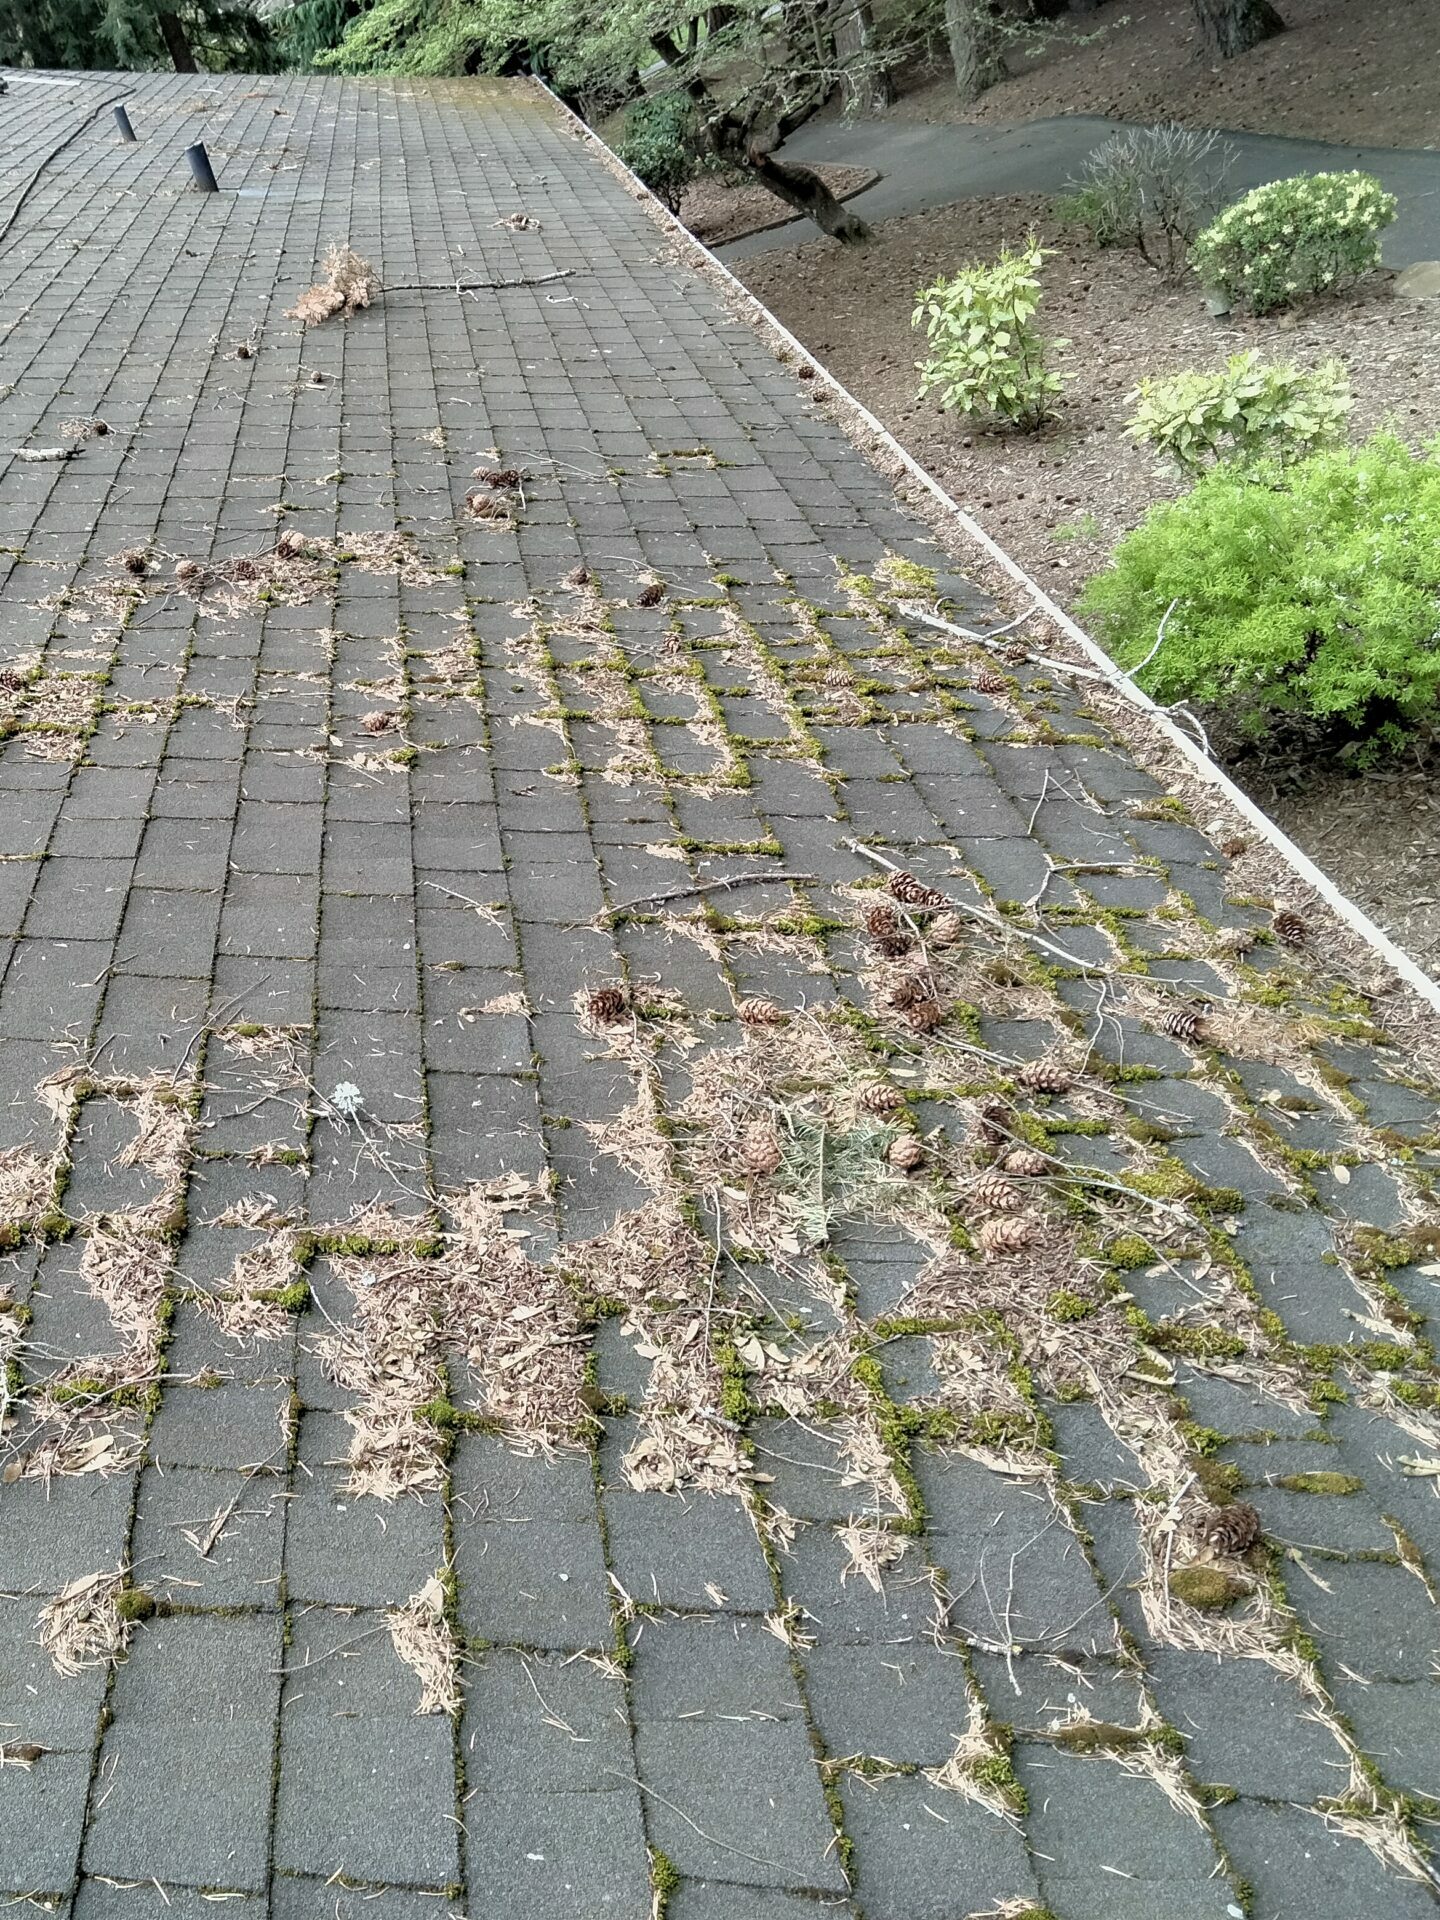 Picture showing roof and gutters covered in debris before residential roof cleaning